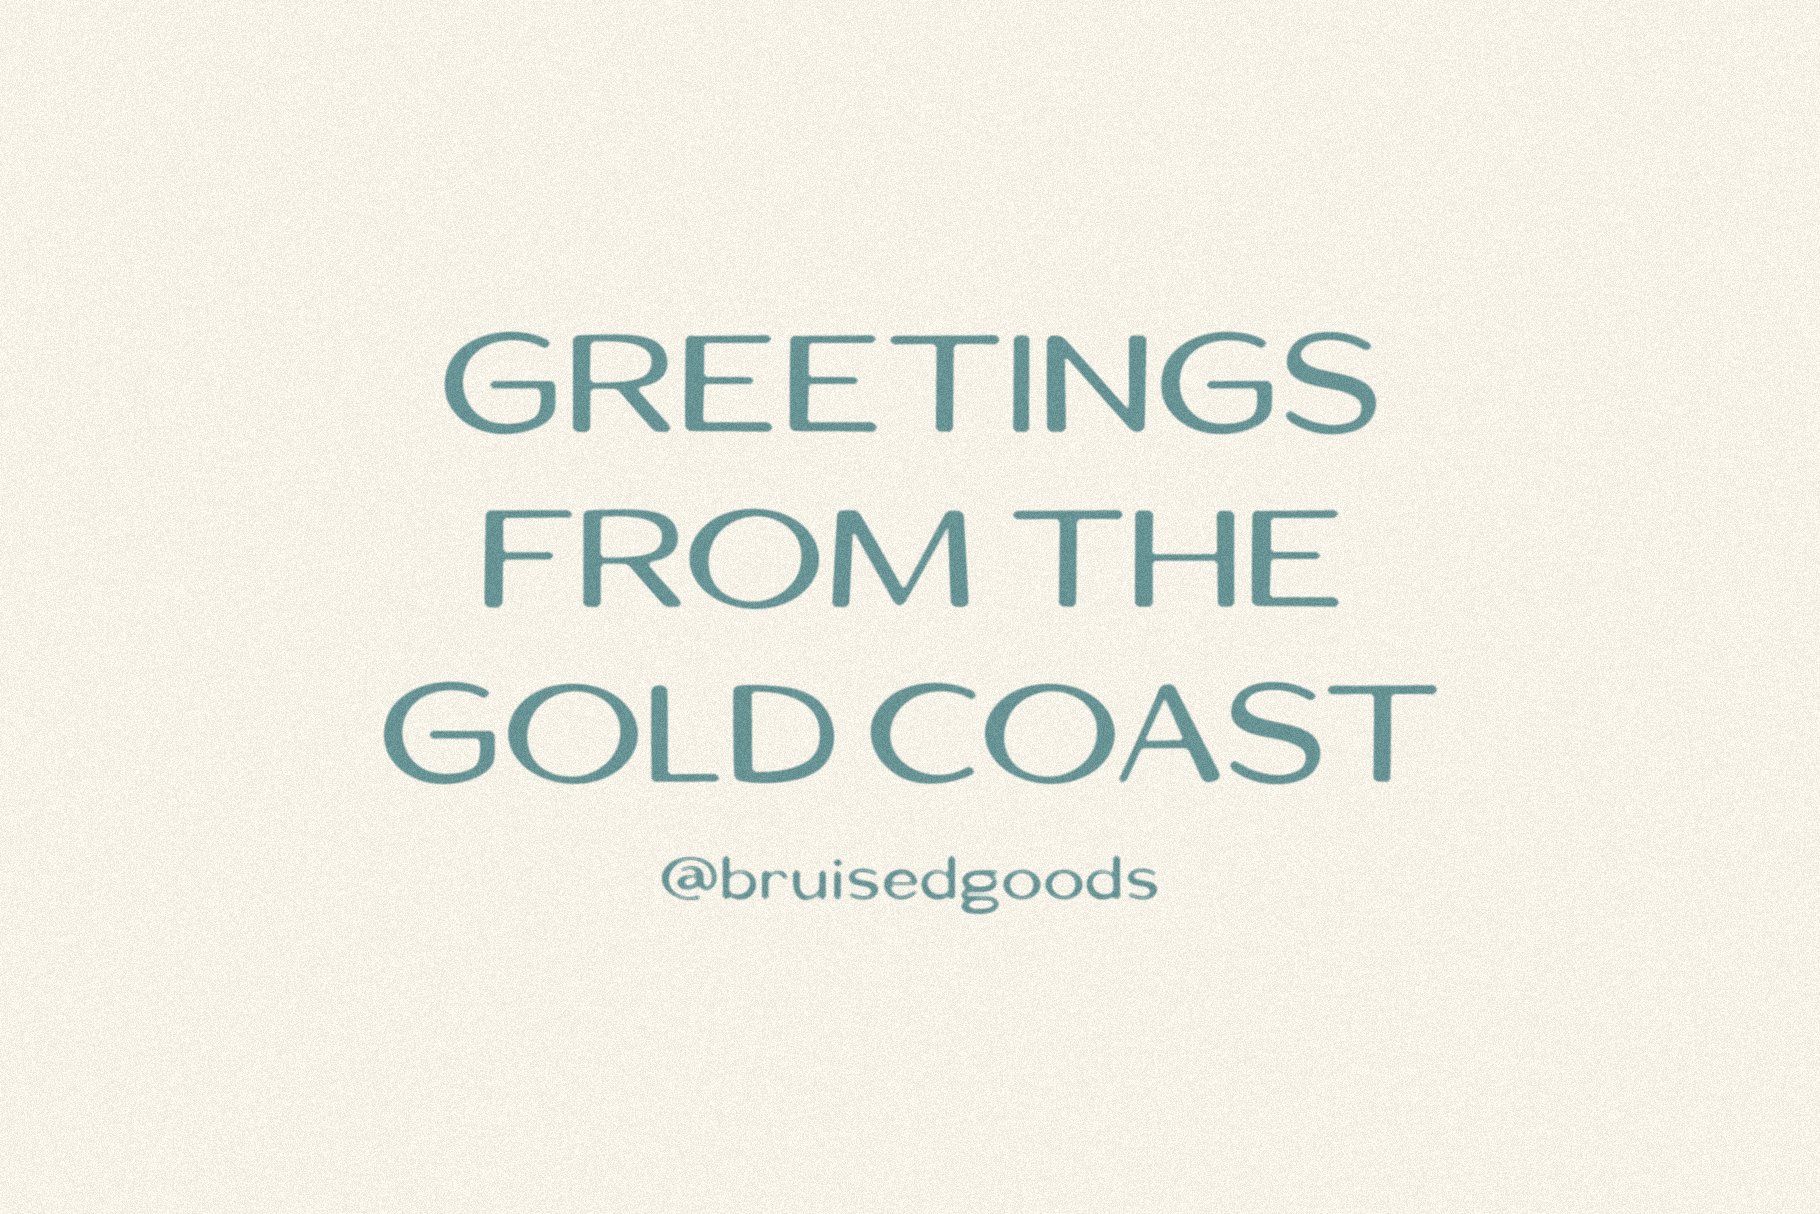 coastal bruised goods font feature images 03 212